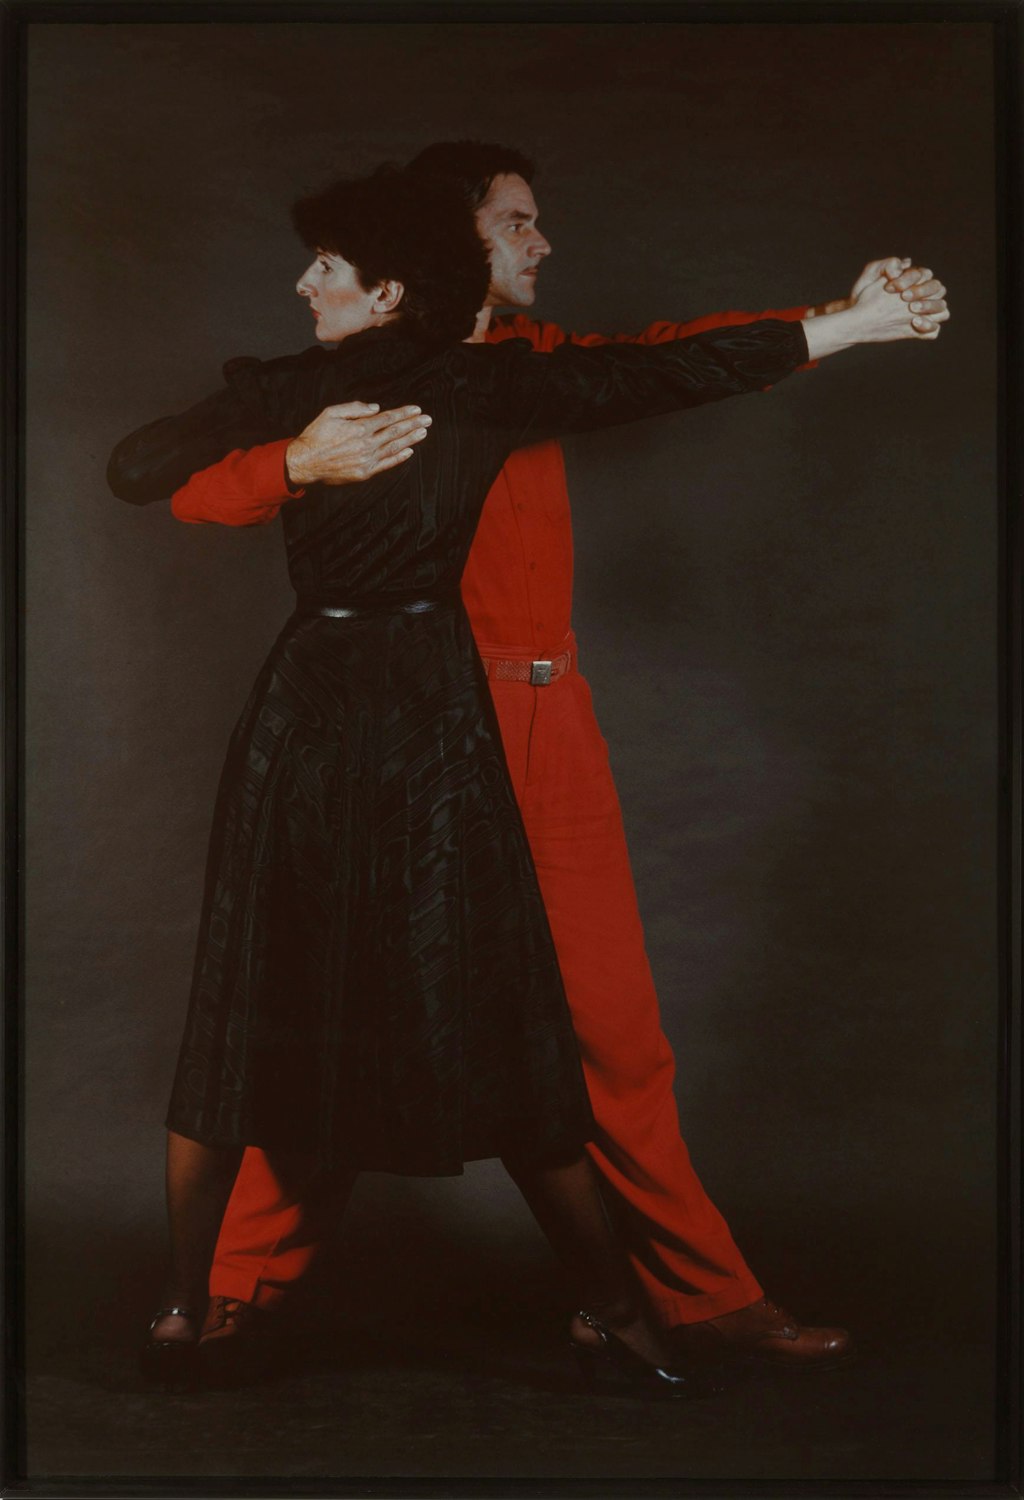 Two people, one in red pants and shirt, the other in a black skirt and shirt, in a tango dance pose.